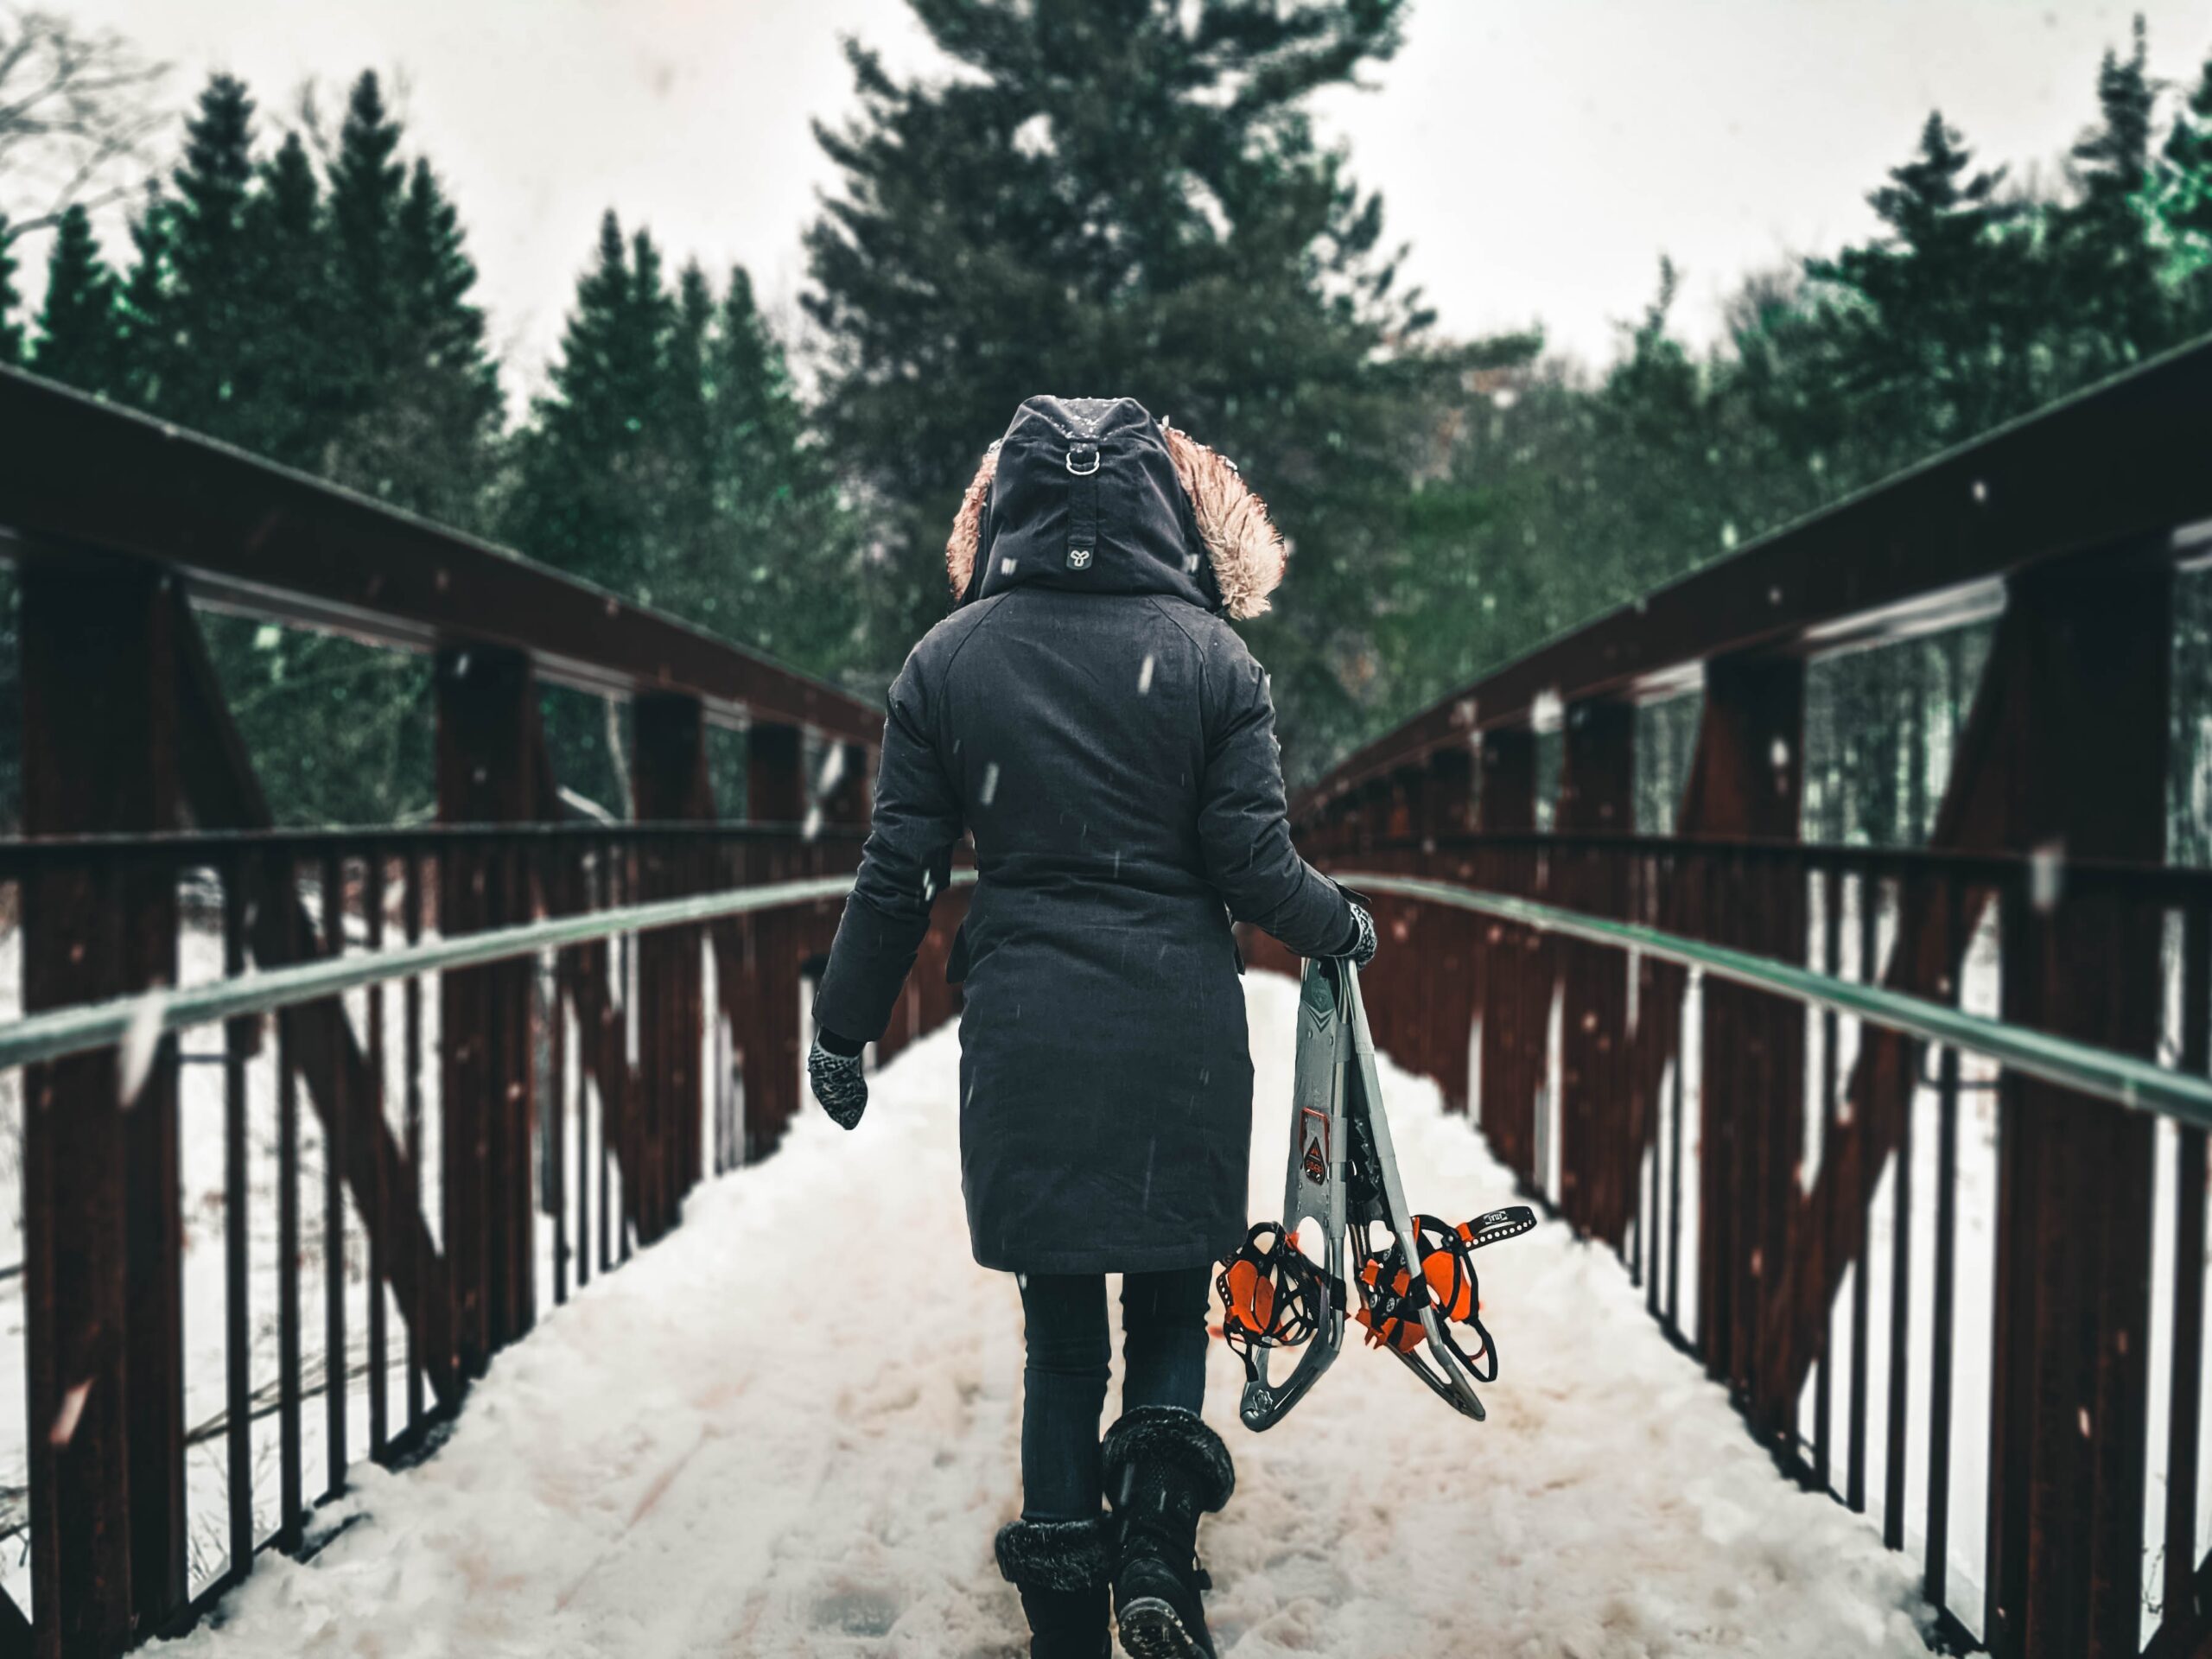 winter images & pictures, apparel, clothing, human, vehicle, bike, bicycle, transportation, coat, tree images & pictures, pants, overcoat, ice, building, boardwalk, HD wood wallpapers, creative common images